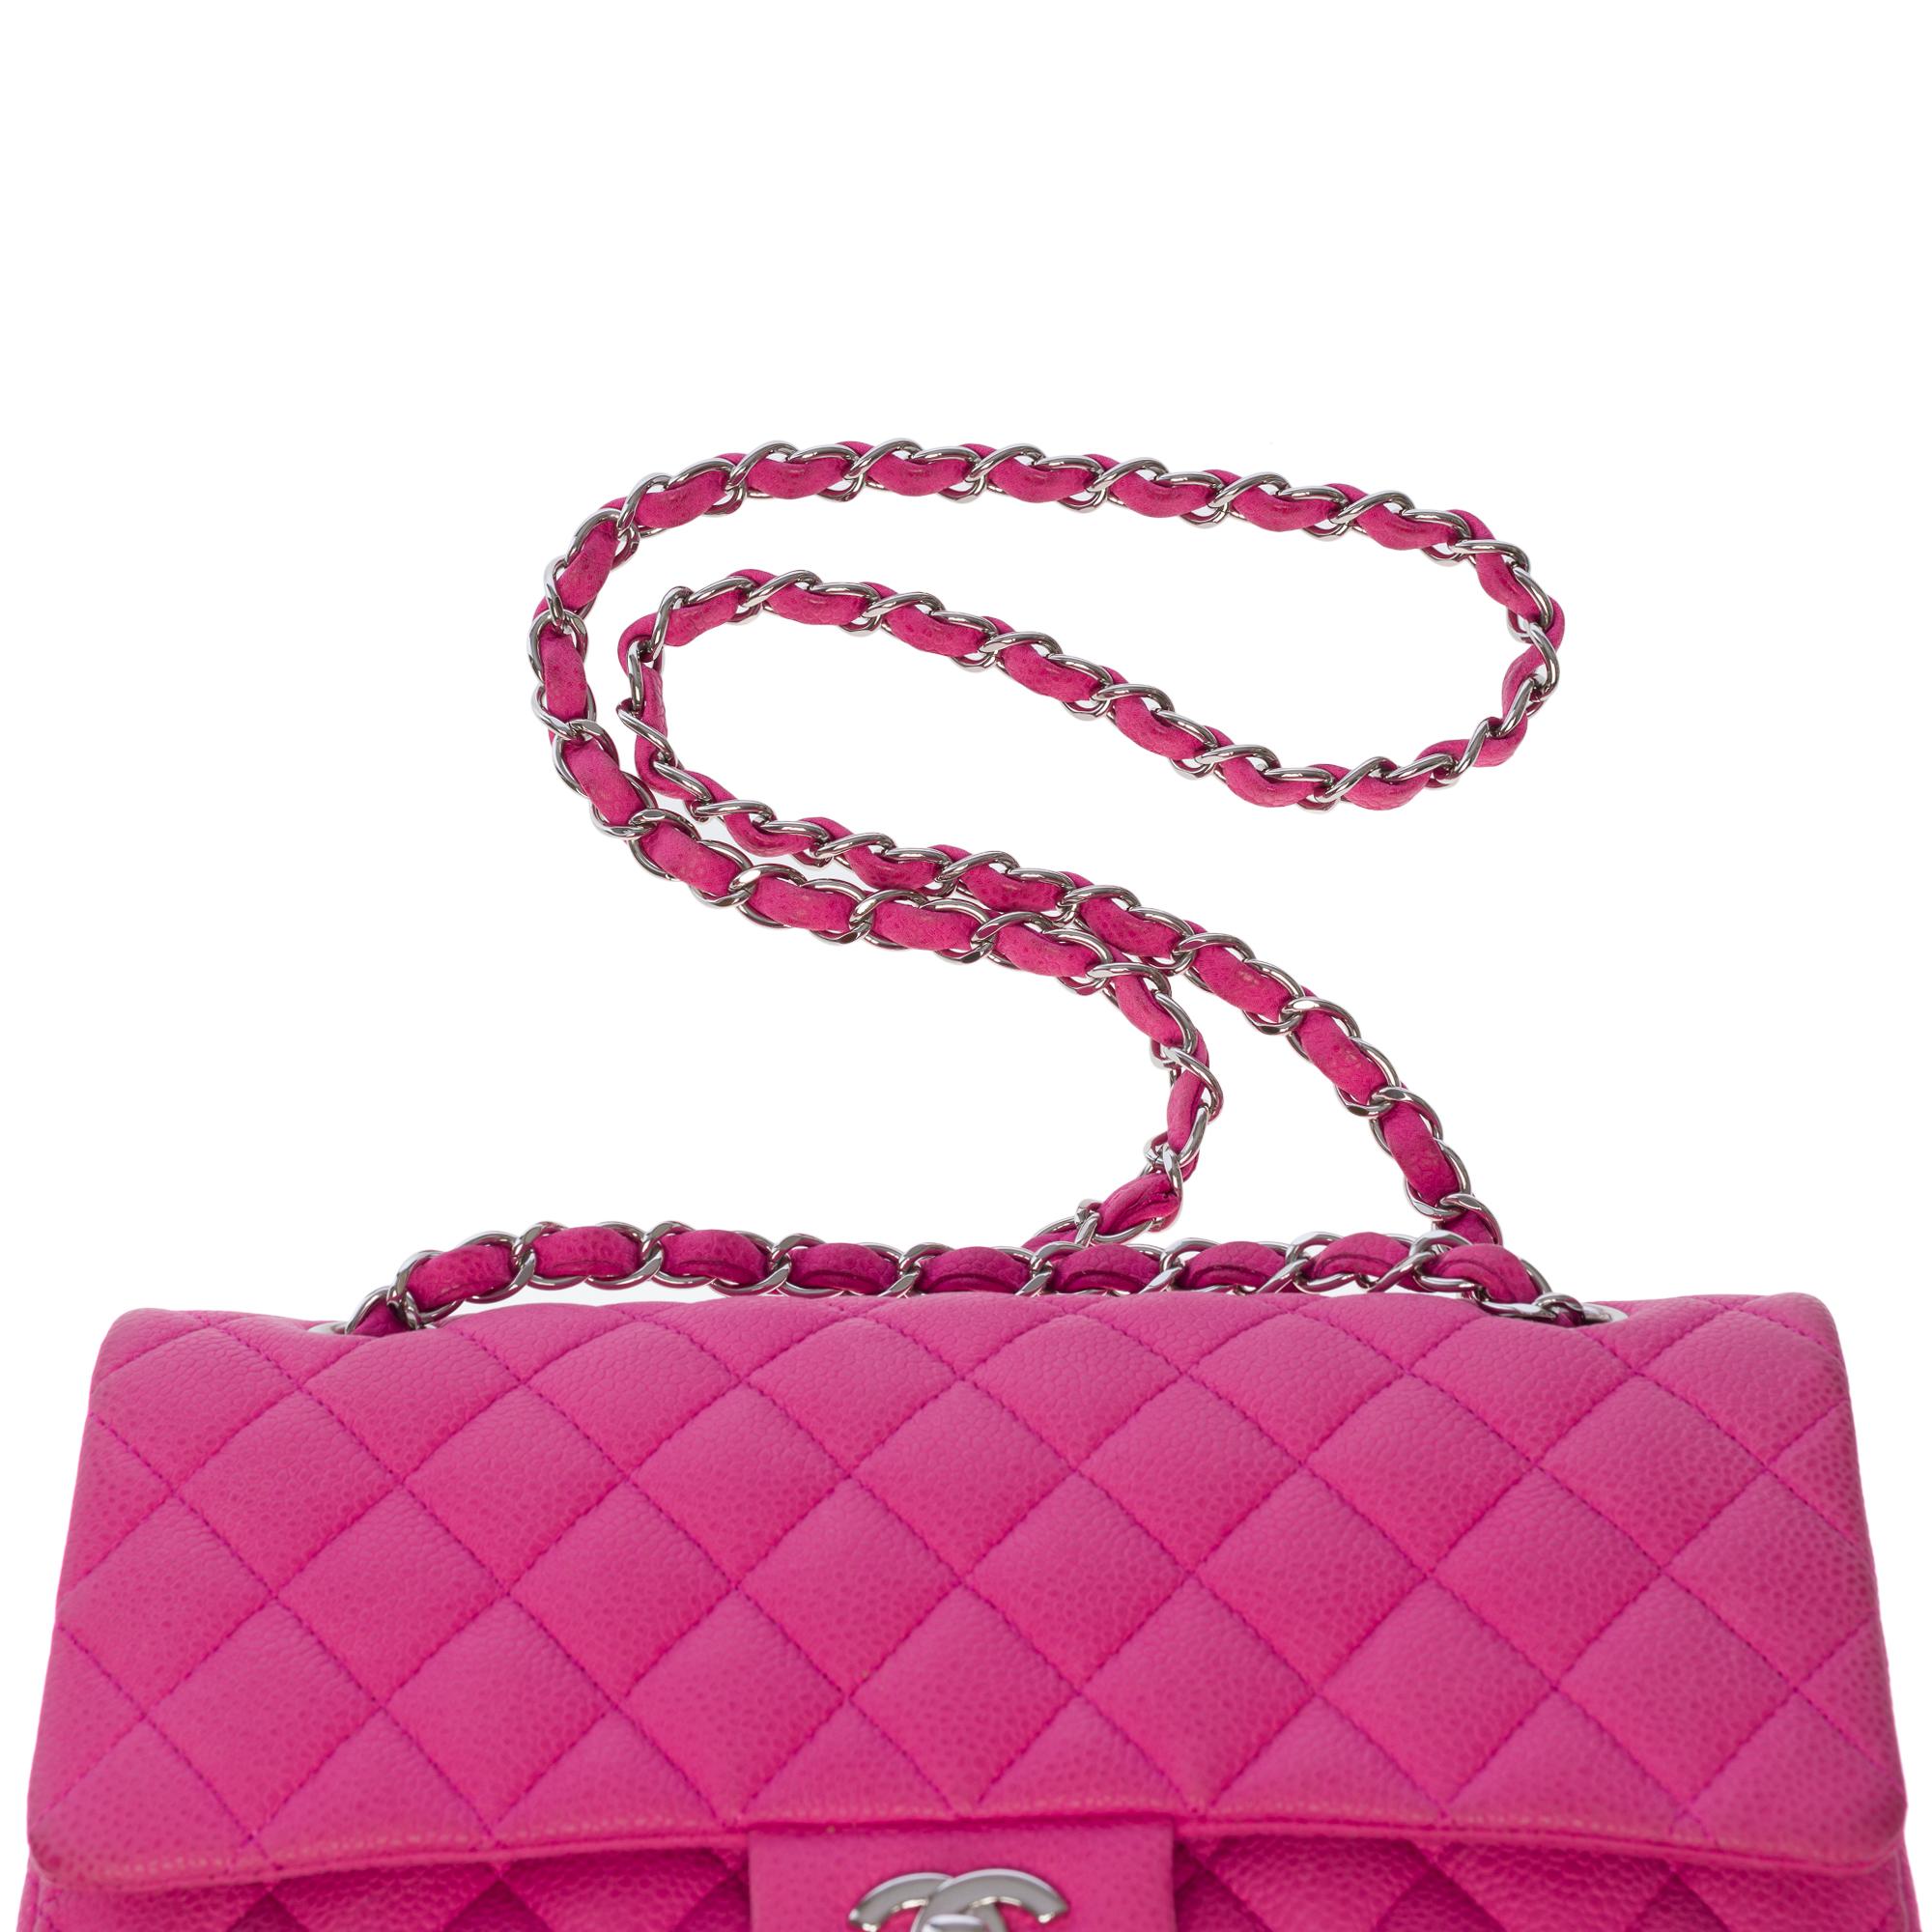 Chanel Timeless double flap shoulder bag in Pink caviar quilted leather, SHW For Sale 5